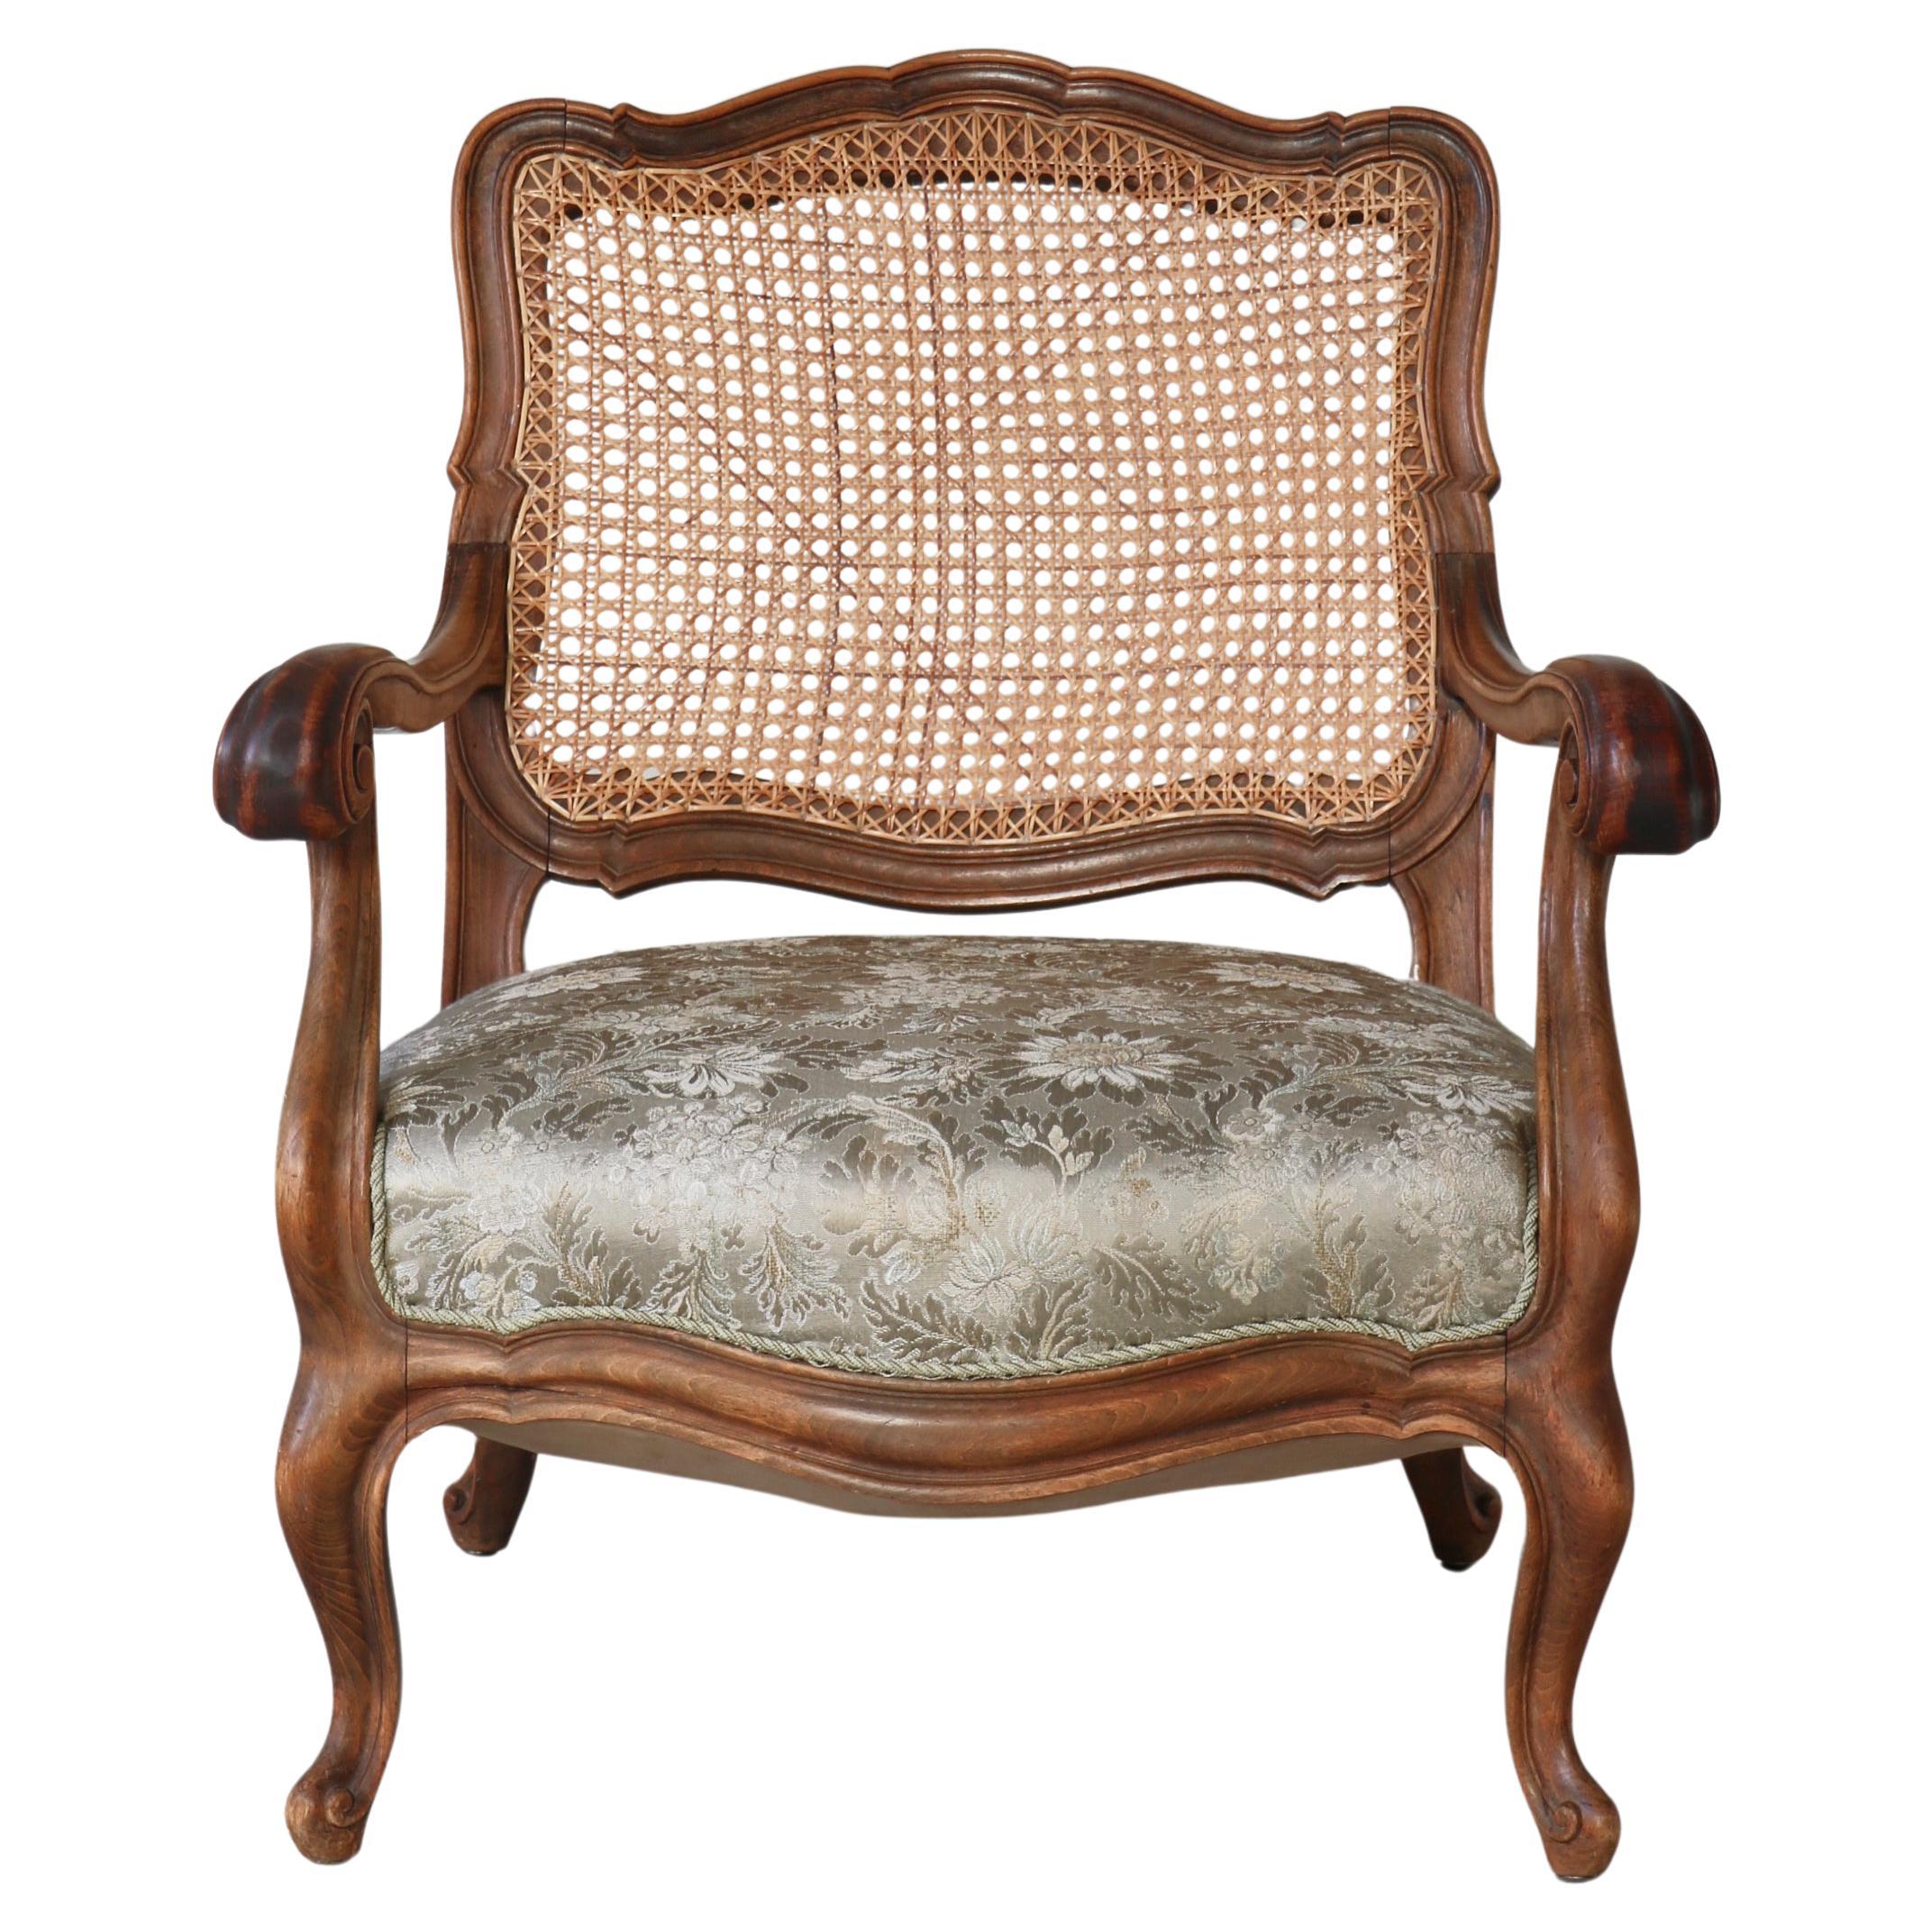 Bergére Chair Rococo Revival by Danish Cabinetmaker, Early 20th Century For Sale